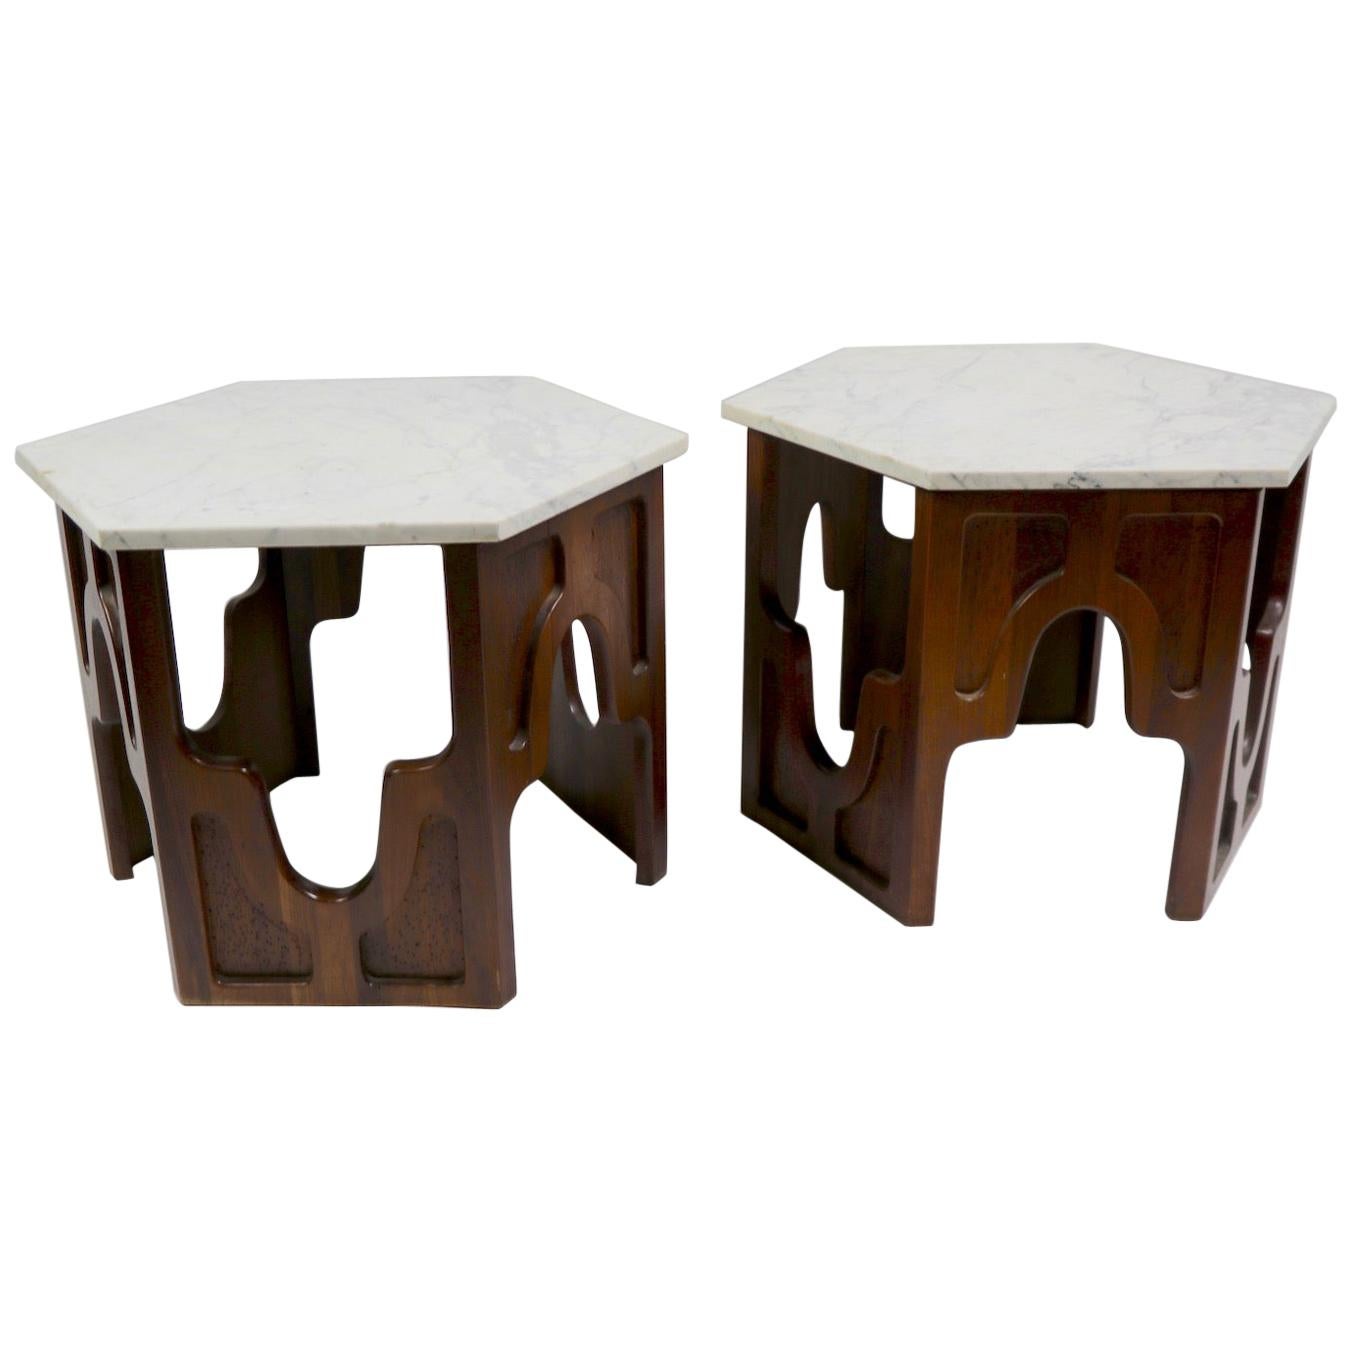 Pair of Hexagonal Marble-Top Tables after Probber